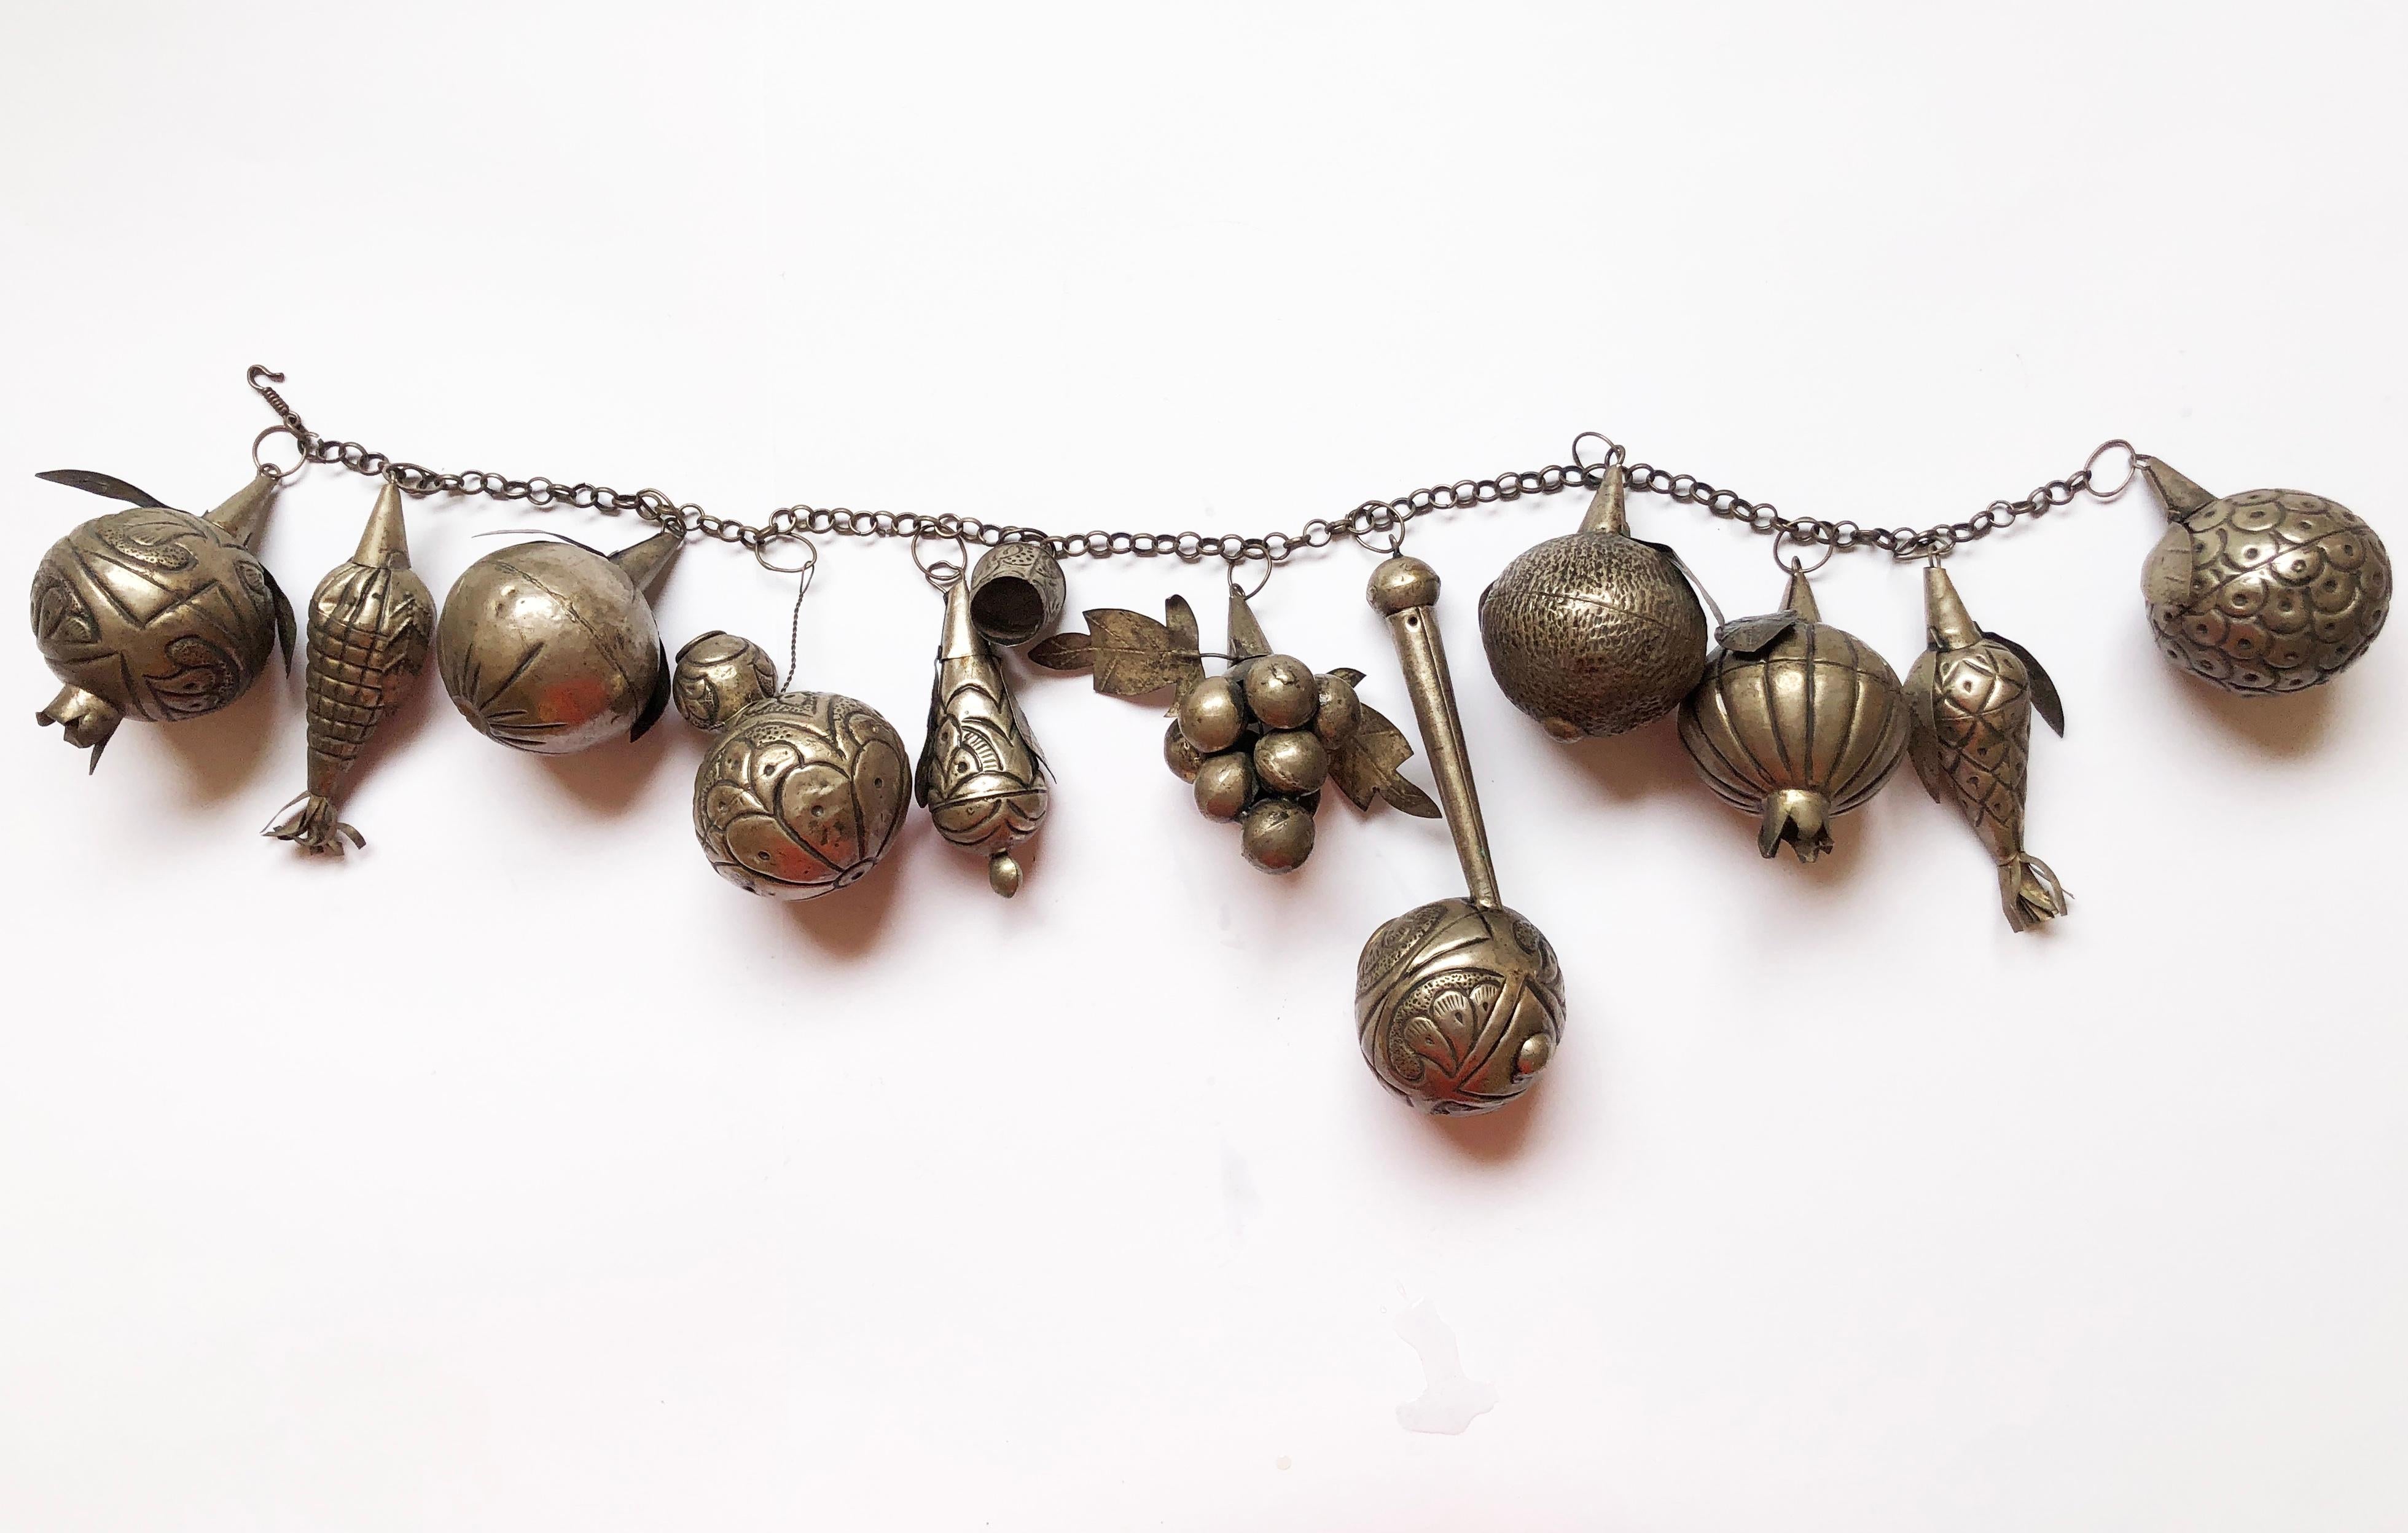 Absolutely unique very large creole 'Penca De Balangandan' from Brazil from around 1960.
Tin base, possibly silver plated.
Traditional slave amulet filled with protective & symbolic charm.
Often carried by (Afro-Brazilian) Bahian women in